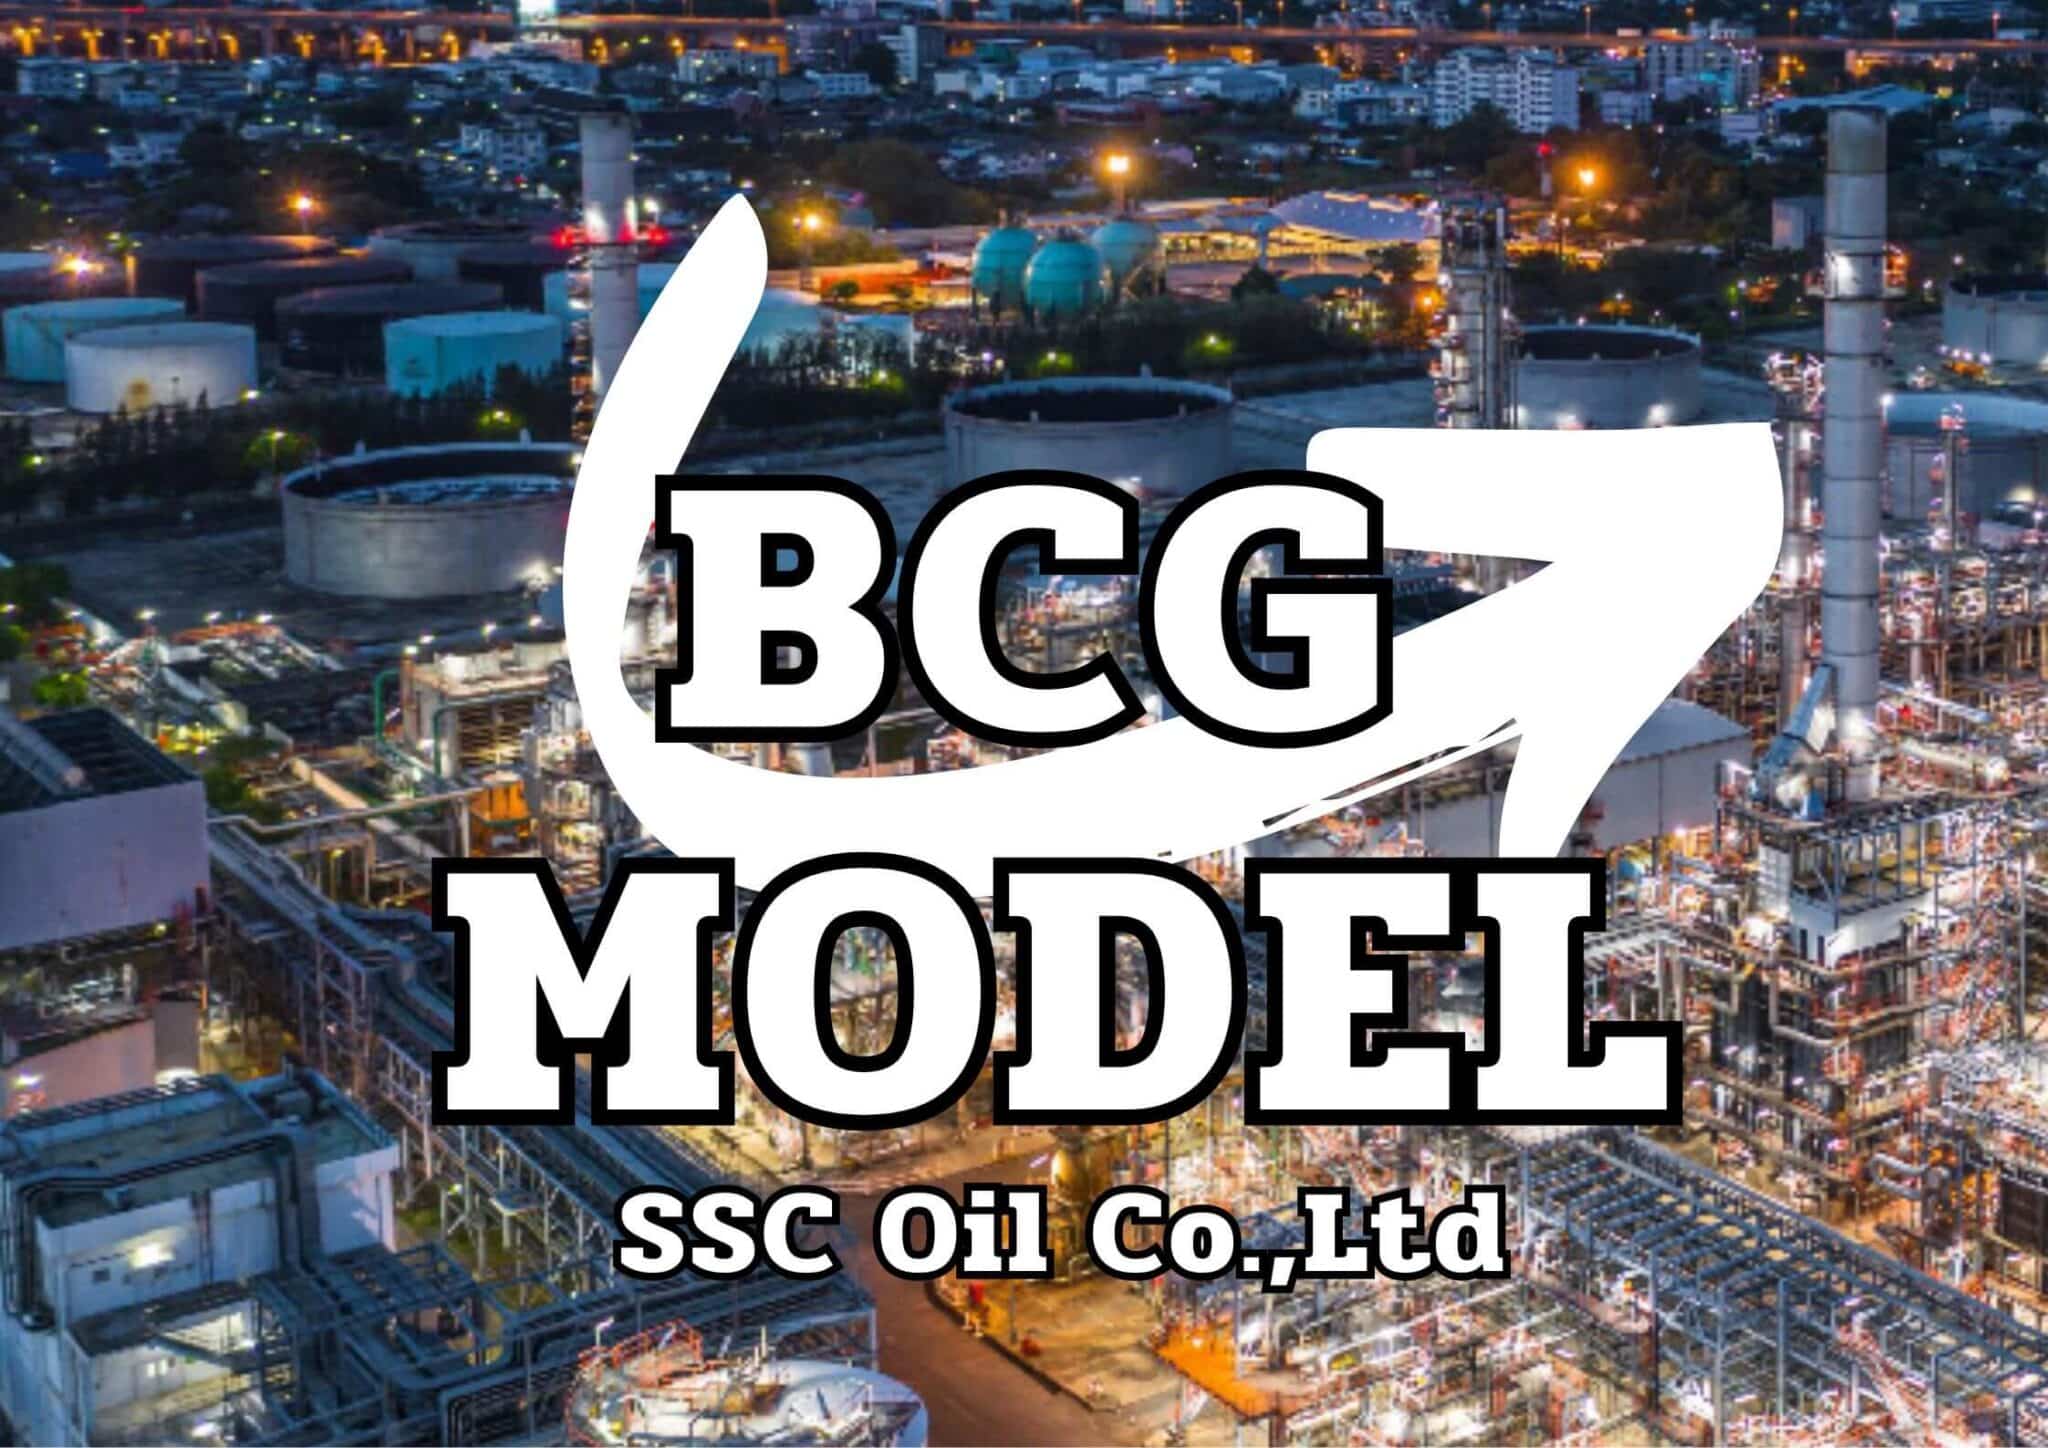 What is BCG Model?